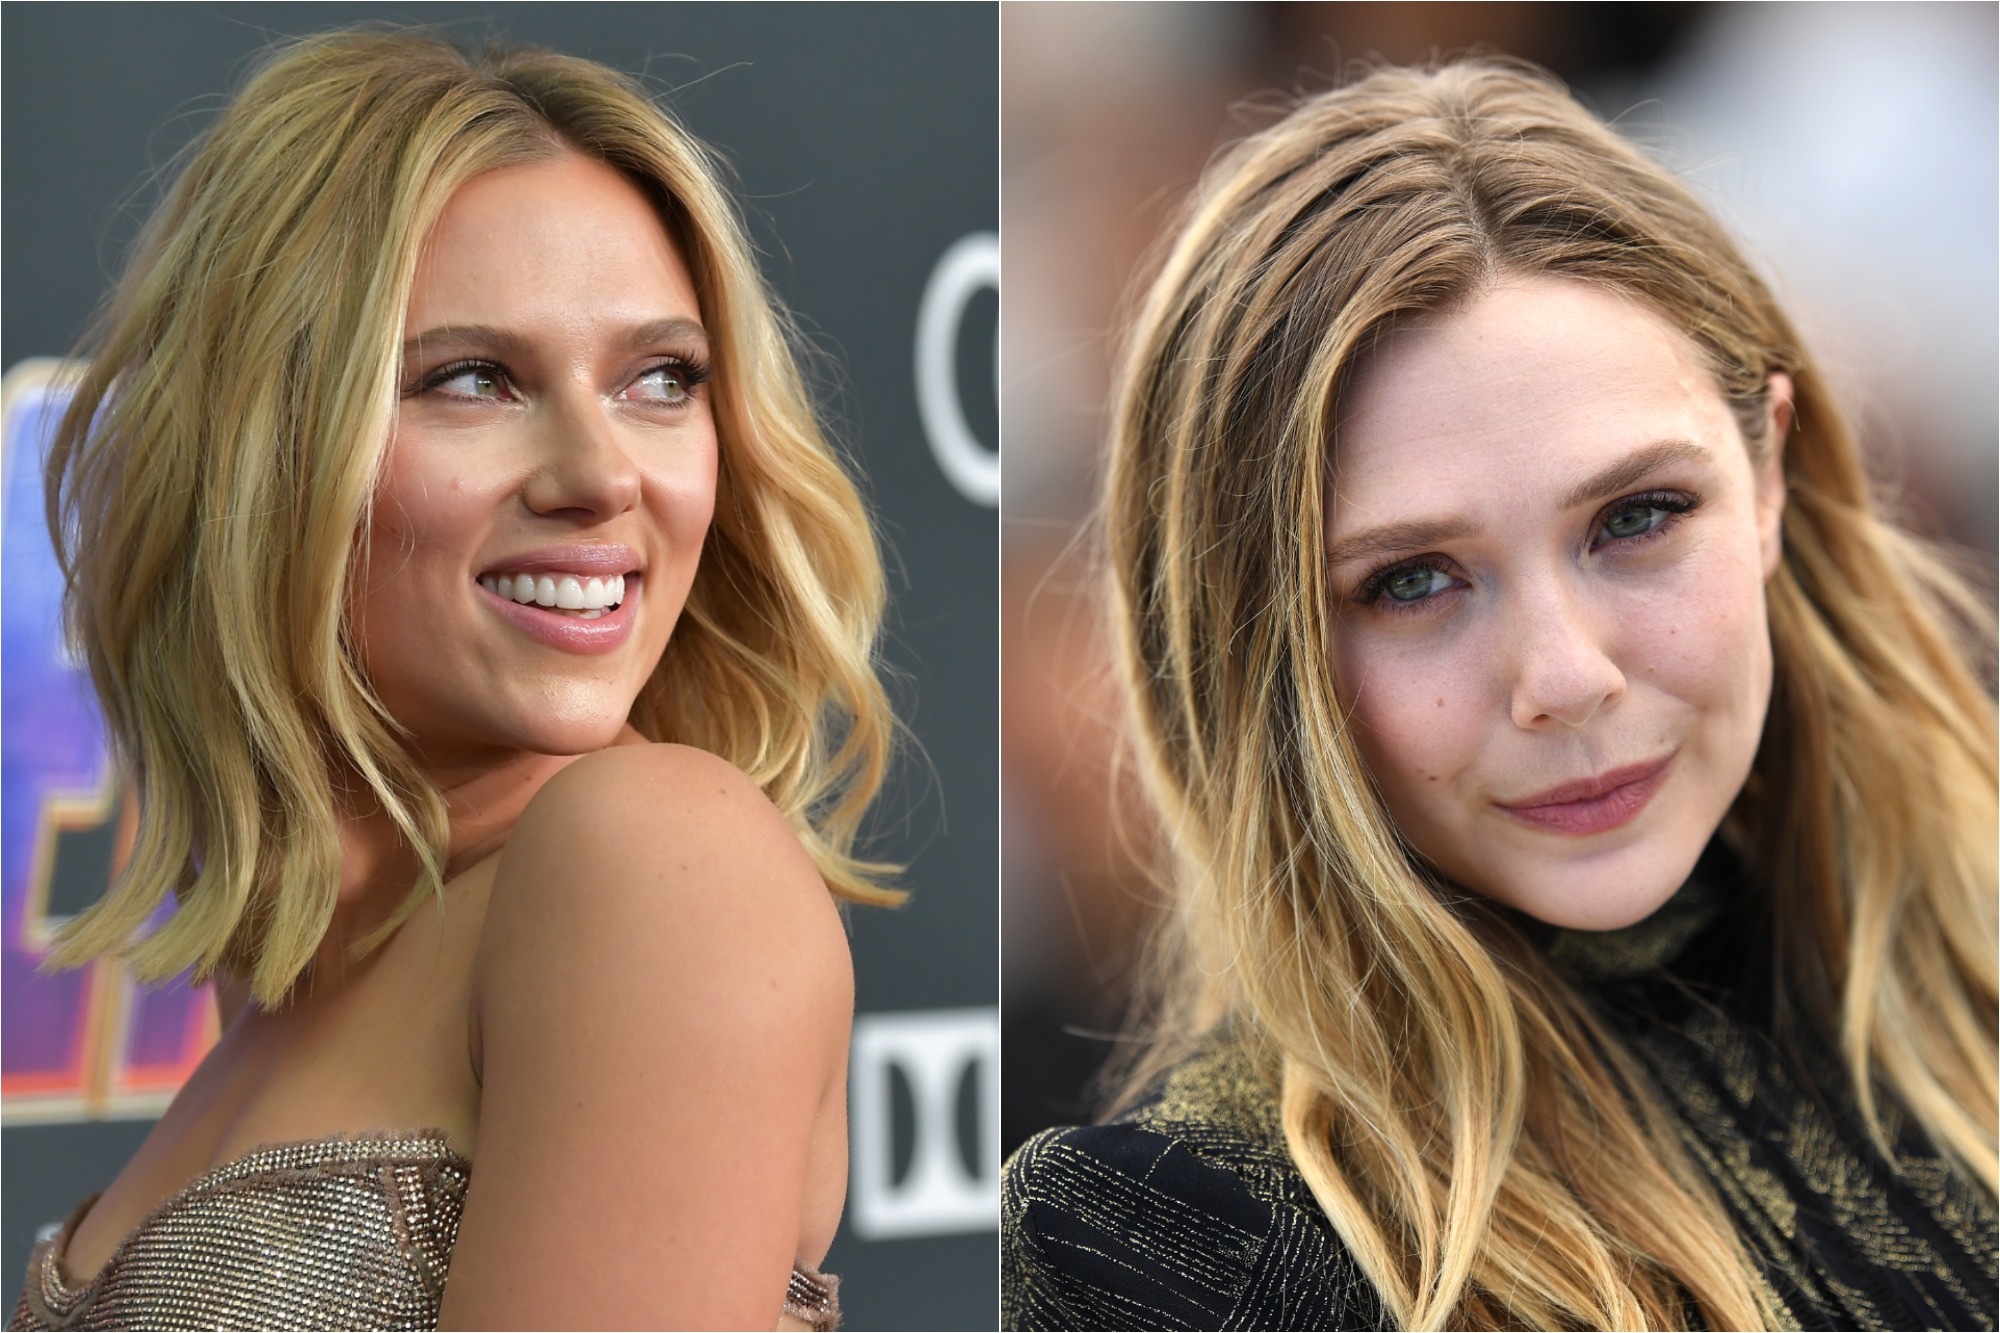 Scarlett Johansson at the world premiere of 'Avengers: Endgame' on April 22, 2019 / Elizabeth Olsen at the 'Wind River' photocall during the 70th annual Cannes Film Festival on May 20, 2017